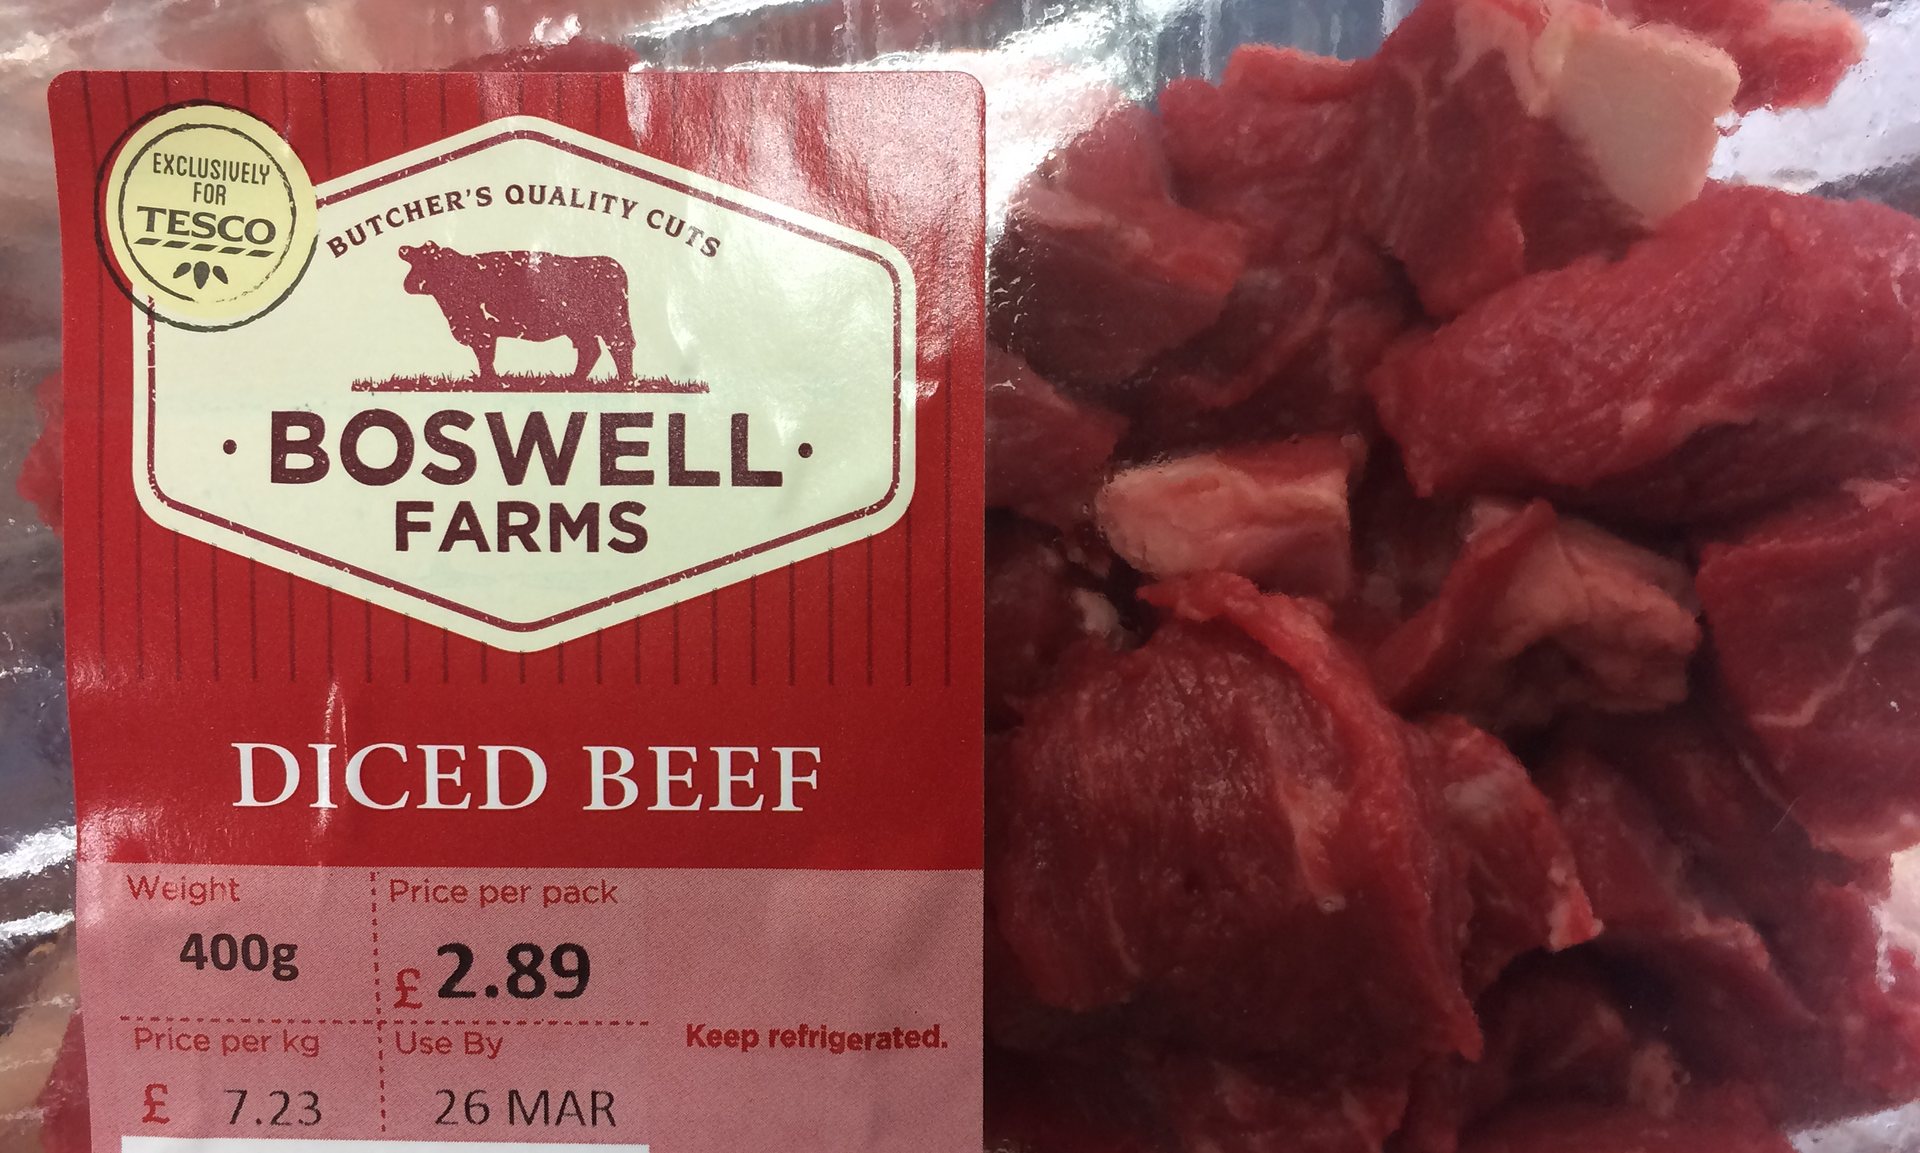 Boswell Farm and Woodside Farm might sound like the perfect place to source your meat from - but they don't exist